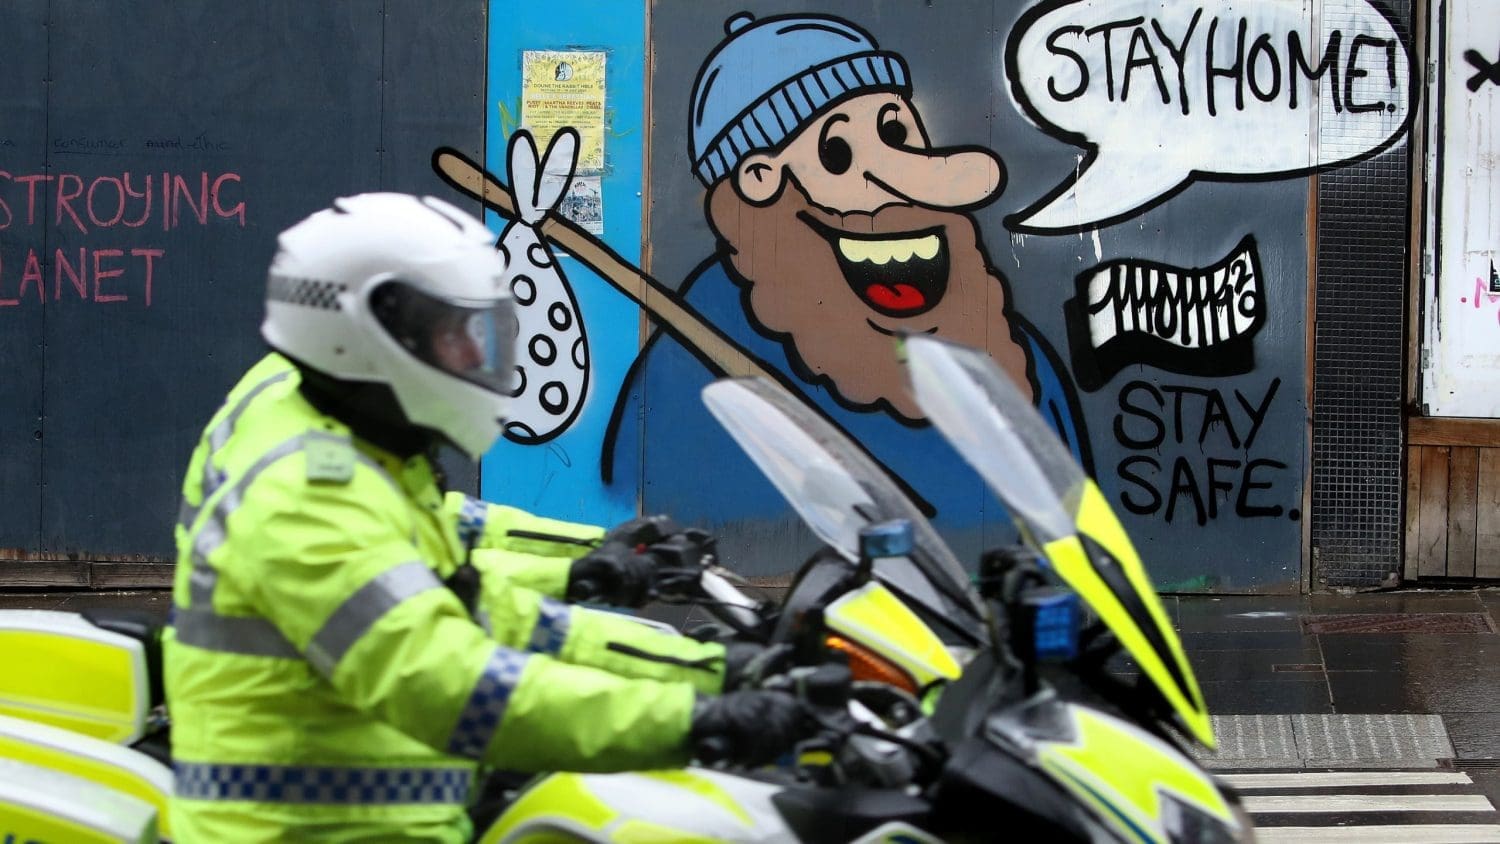 A police officer on a motorbike in front of a mural that advises people 'stay home'